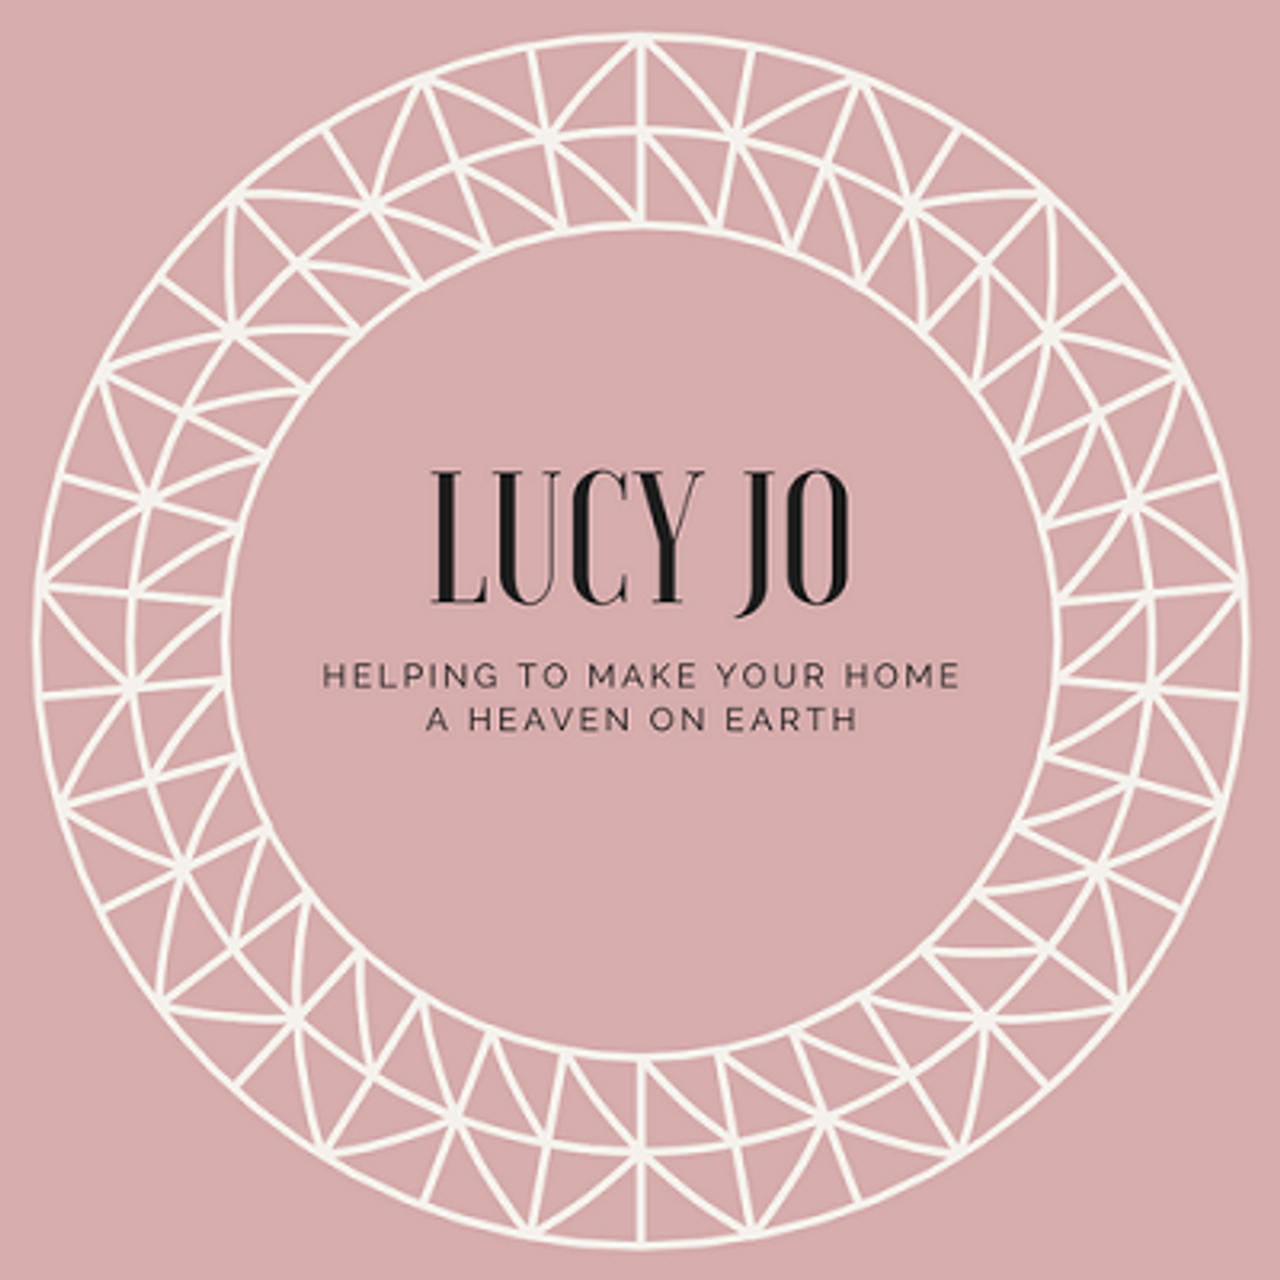 Lucyjohome